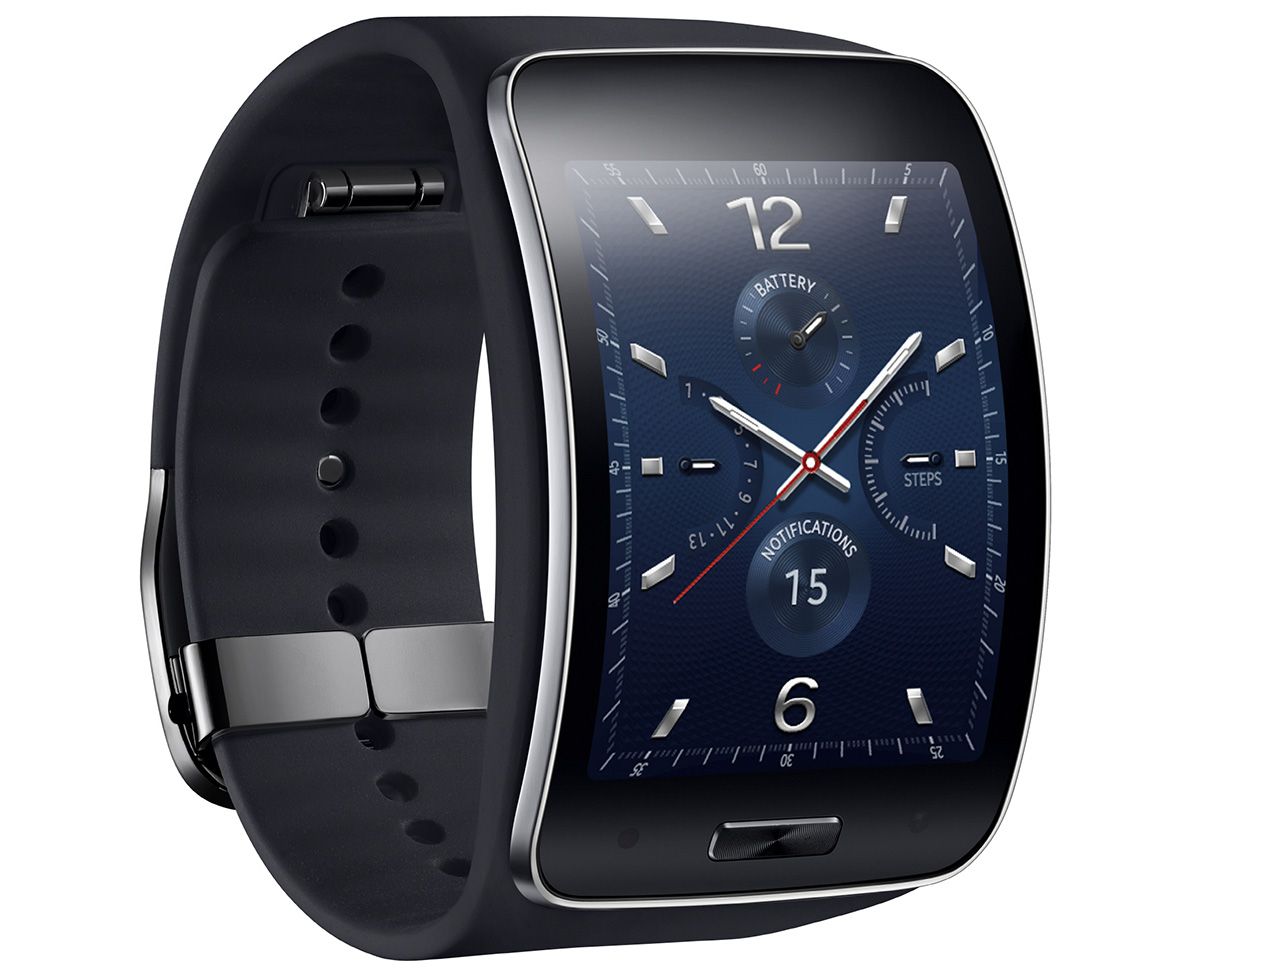 samsung gear s smartwatch surprisingly unveiled before ifa curved display and 3g connectivity image 2